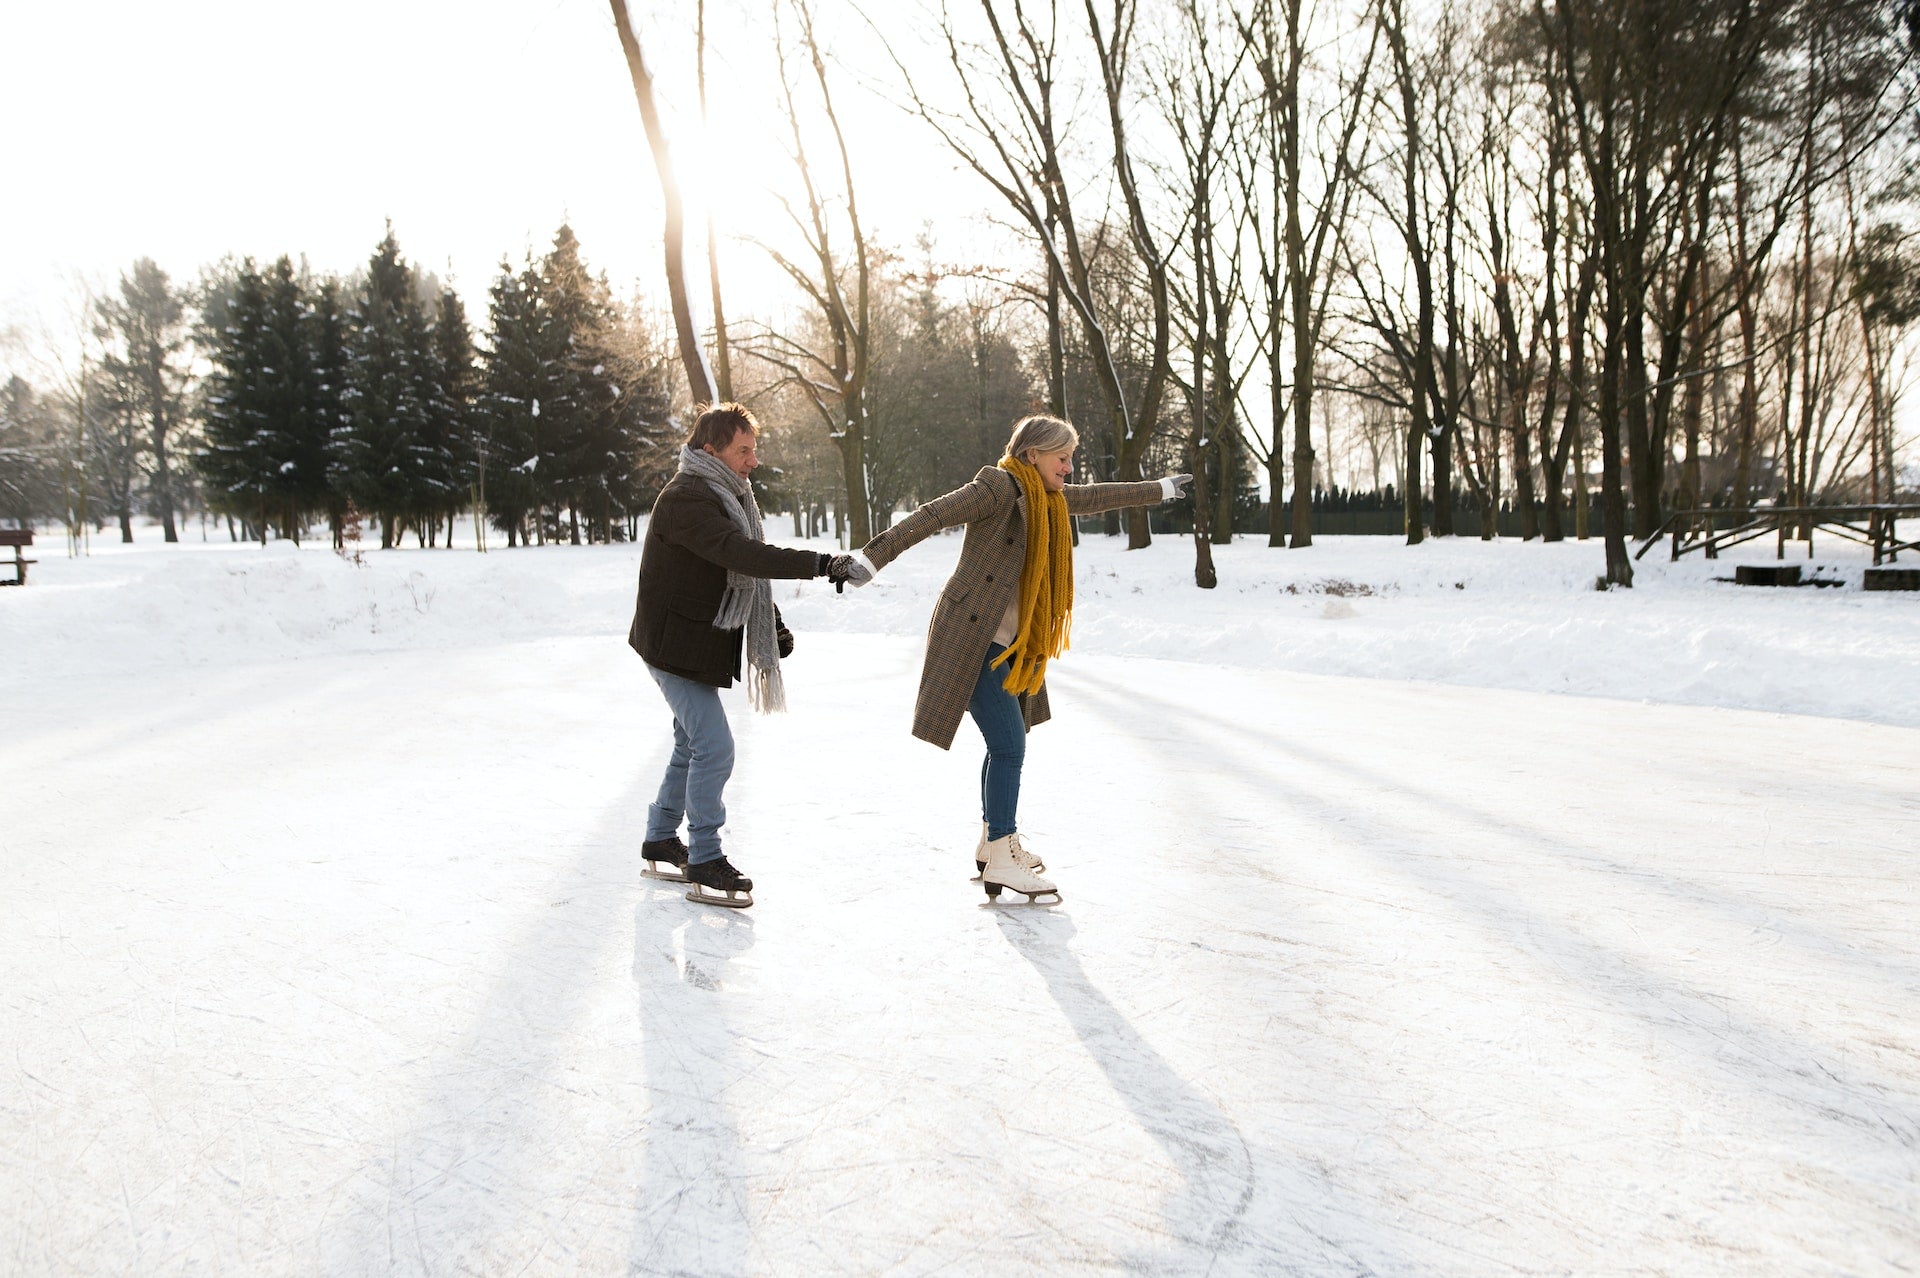 A man and a woman ice skating on a pond outdoors